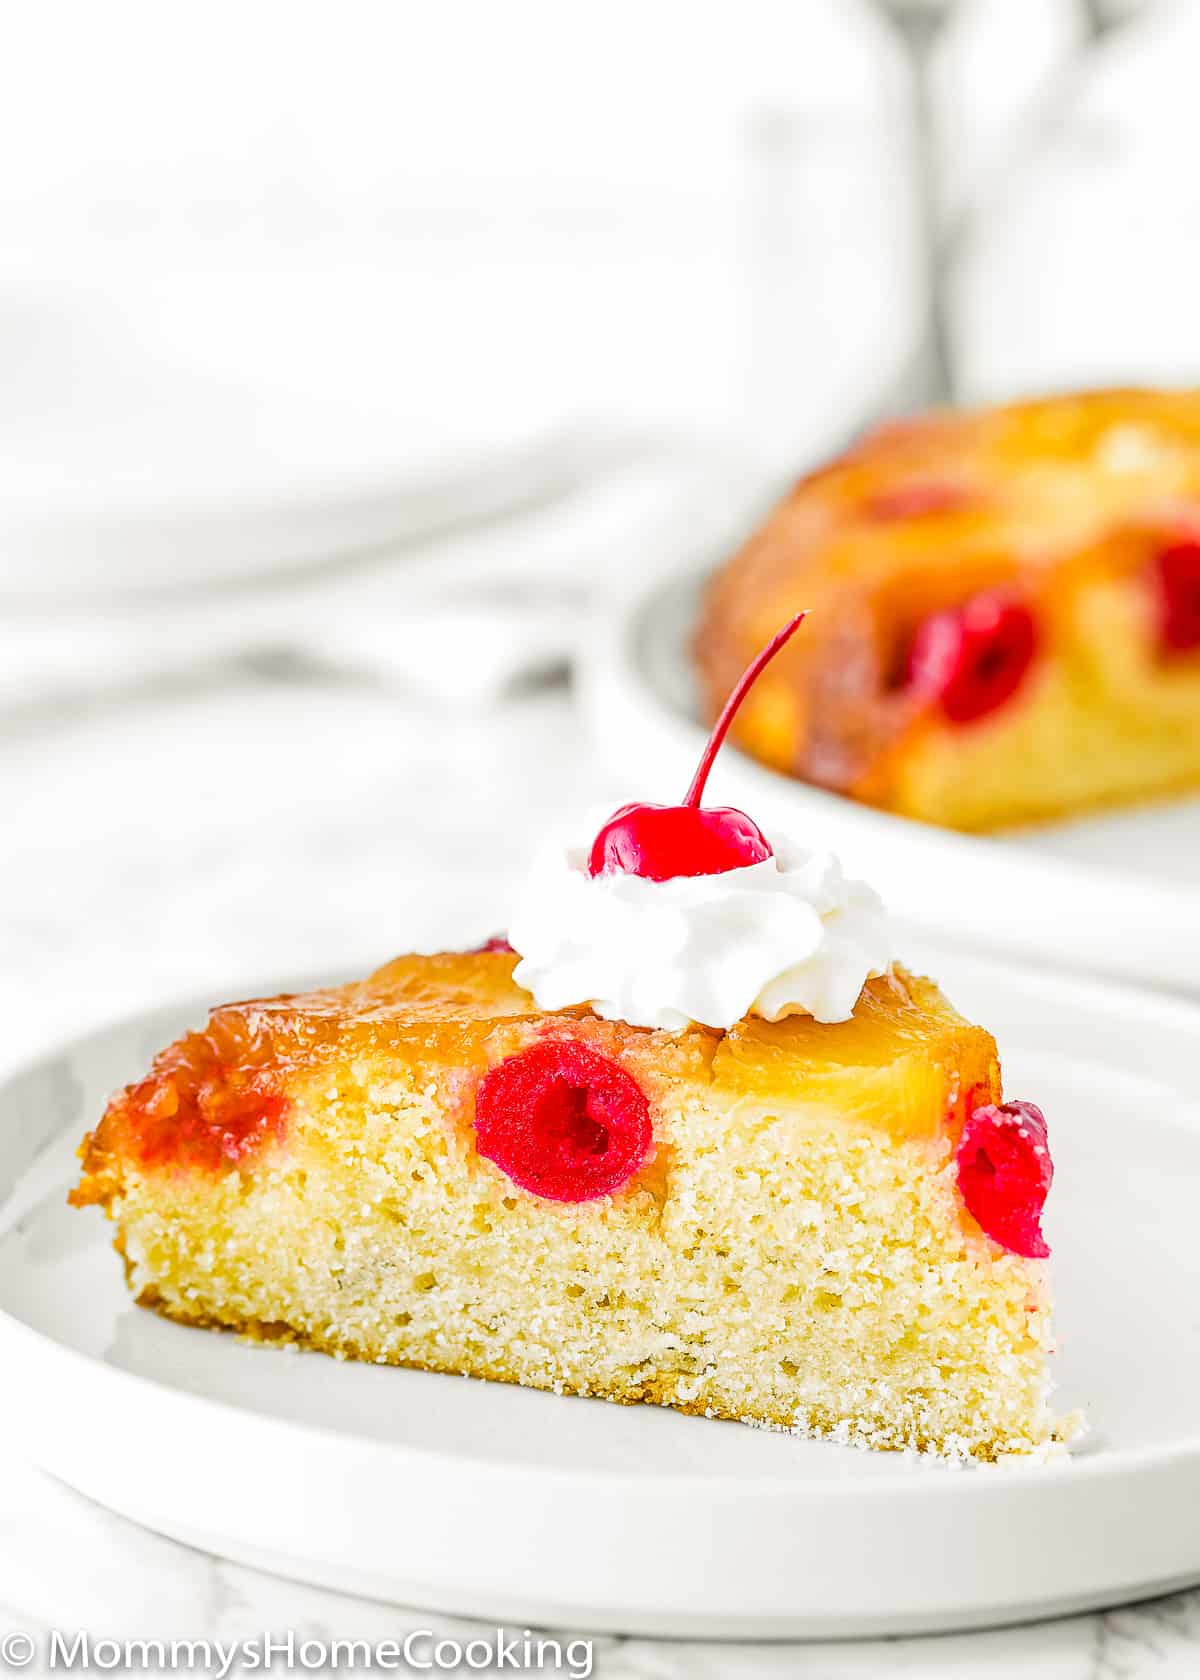 slice of Eggless Pineapple Upside Down Cake with whipped cream on a plate